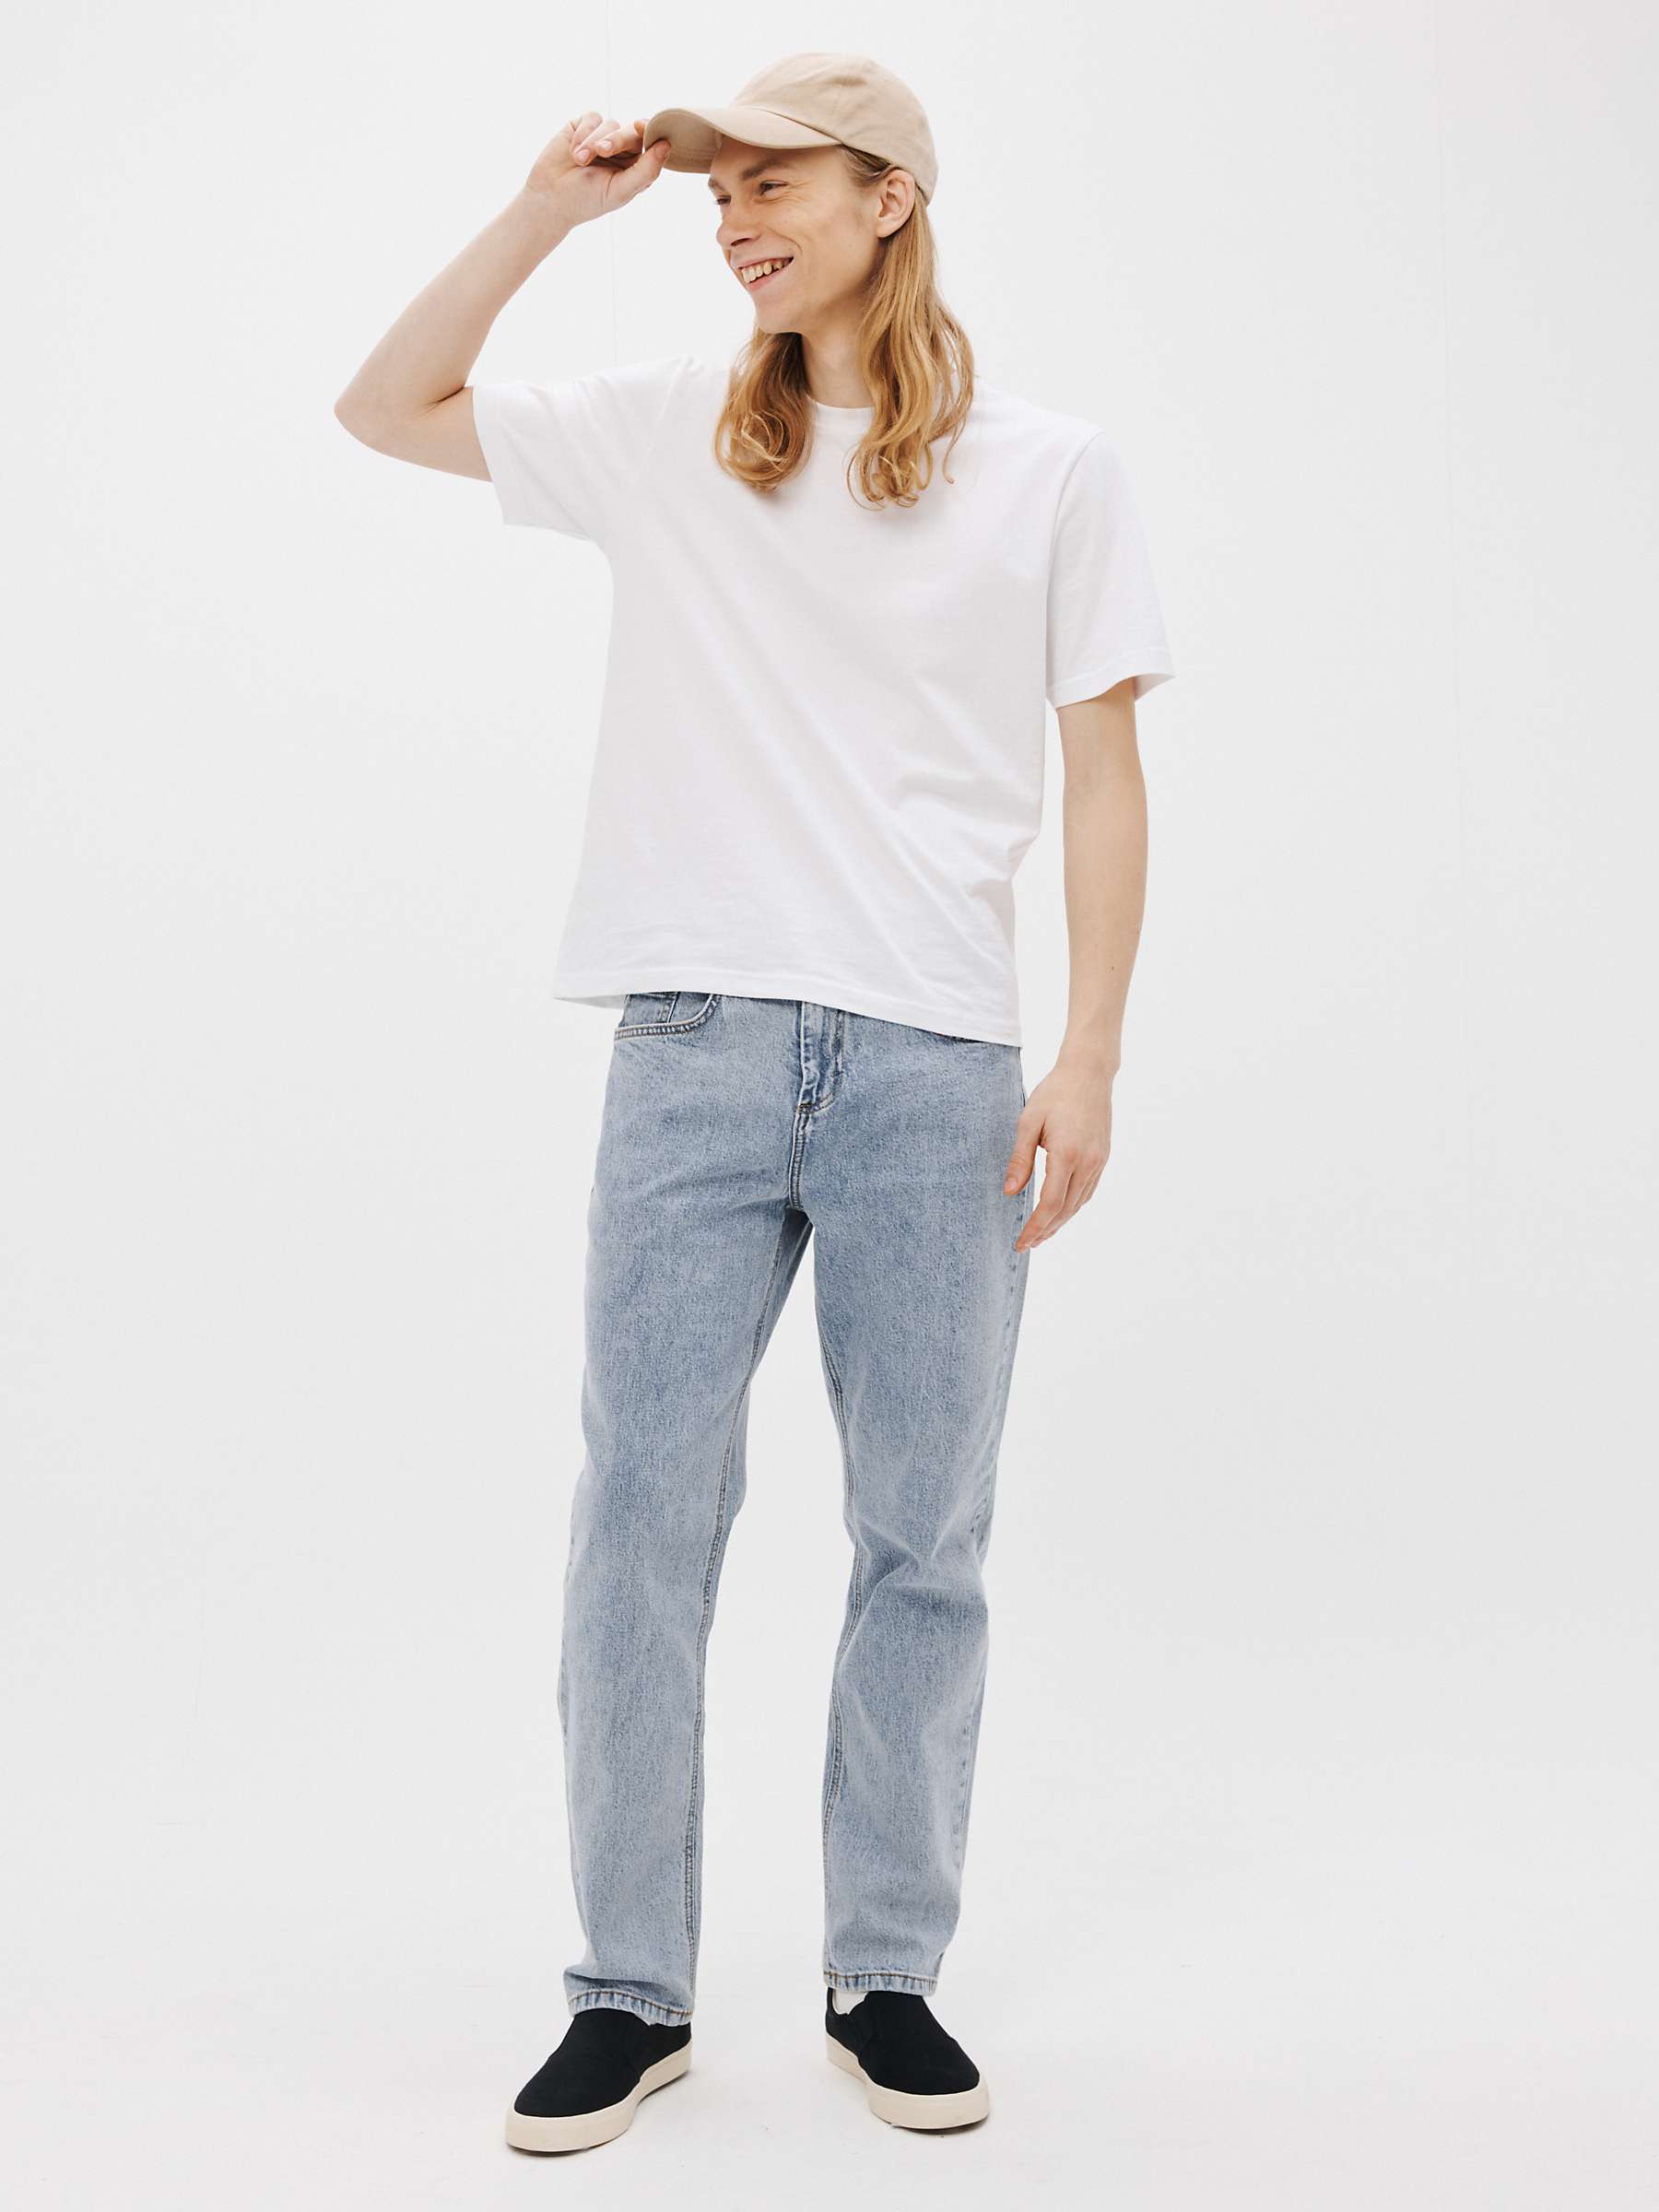 Buy John Lewis ANYDAY Straight Fit Denim Jeans, Stone Wash Online at johnlewis.com